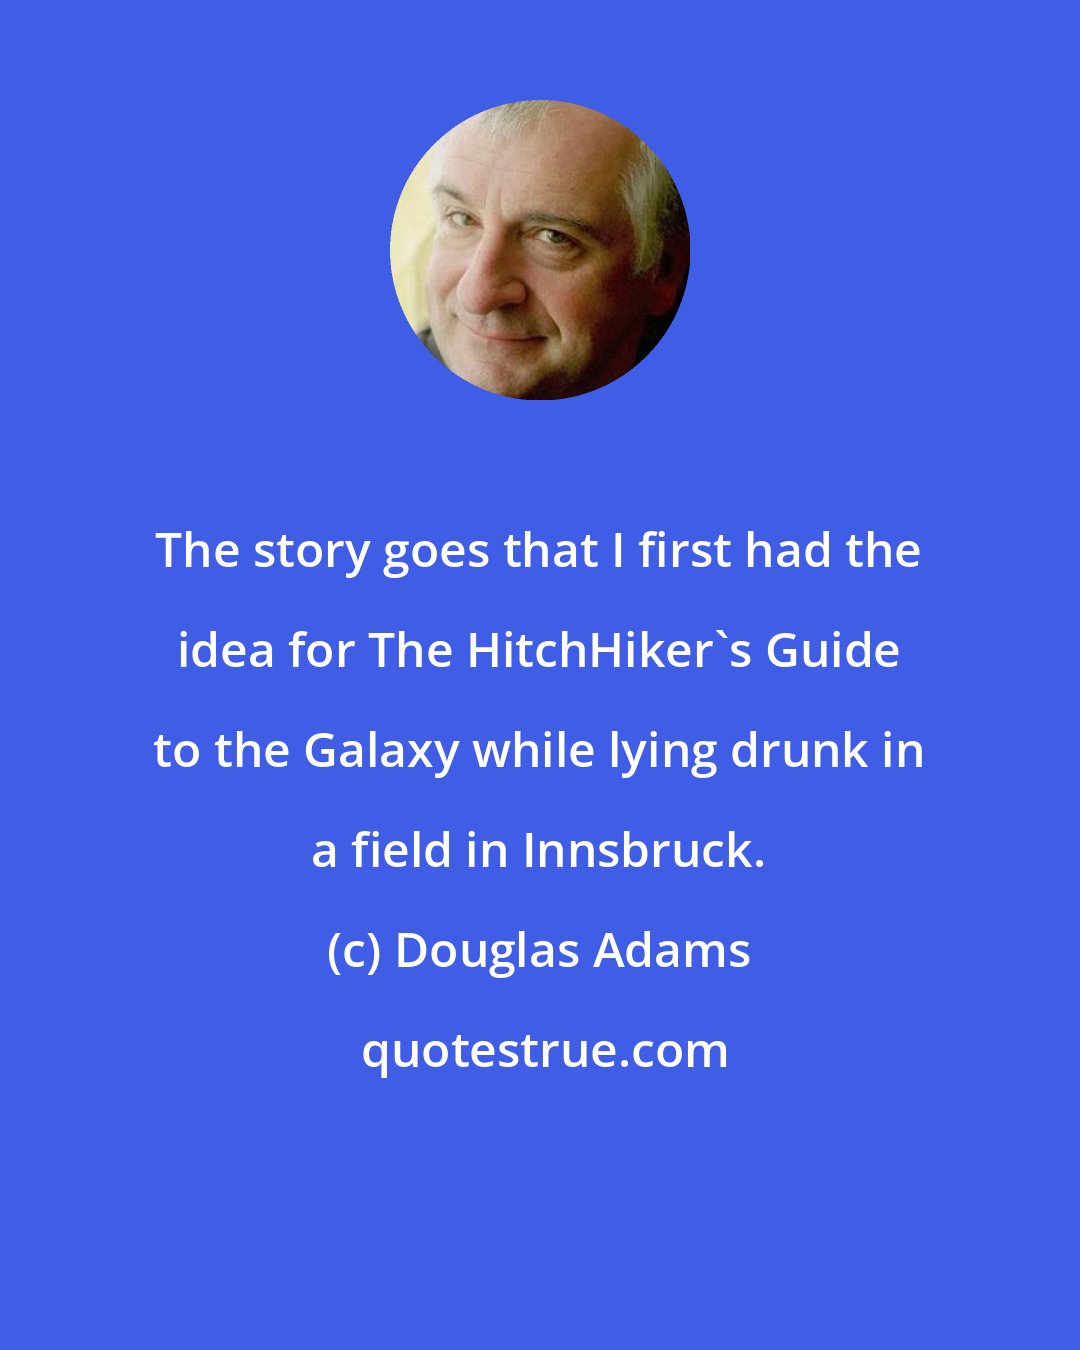 Douglas Adams: The story goes that I first had the idea for The HitchHiker's Guide to the Galaxy while lying drunk in a field in Innsbruck.